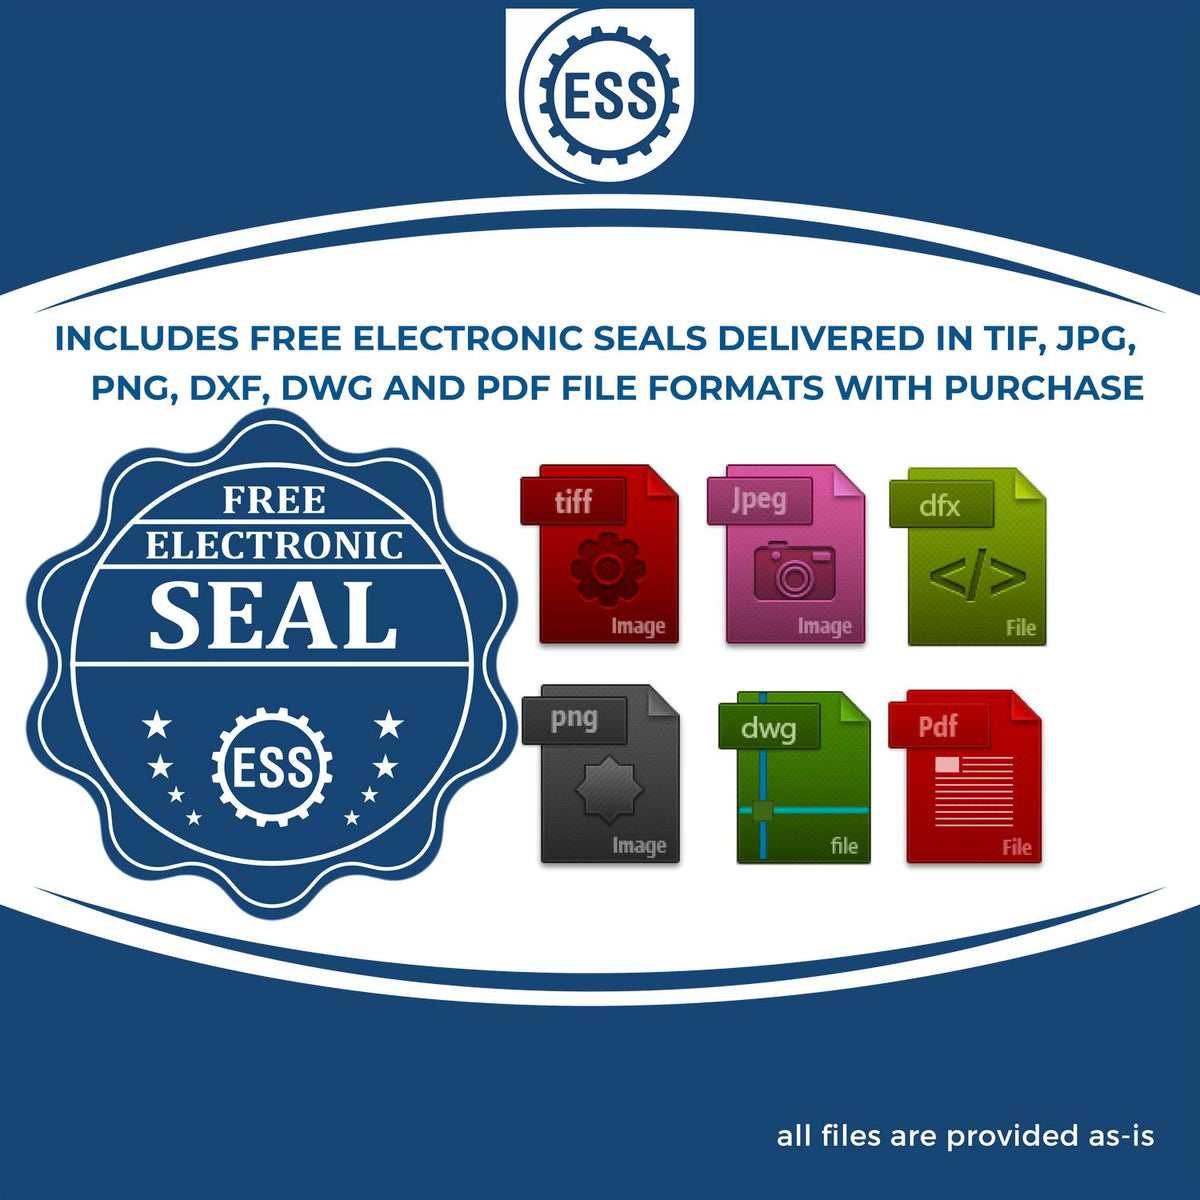 An infographic for the free electronic seal for the Slim Pre-Inked Florida Land Surveyor Seal Stamp illustrating the different file type icons such as DXF, DWG, TIF, JPG and PNG.